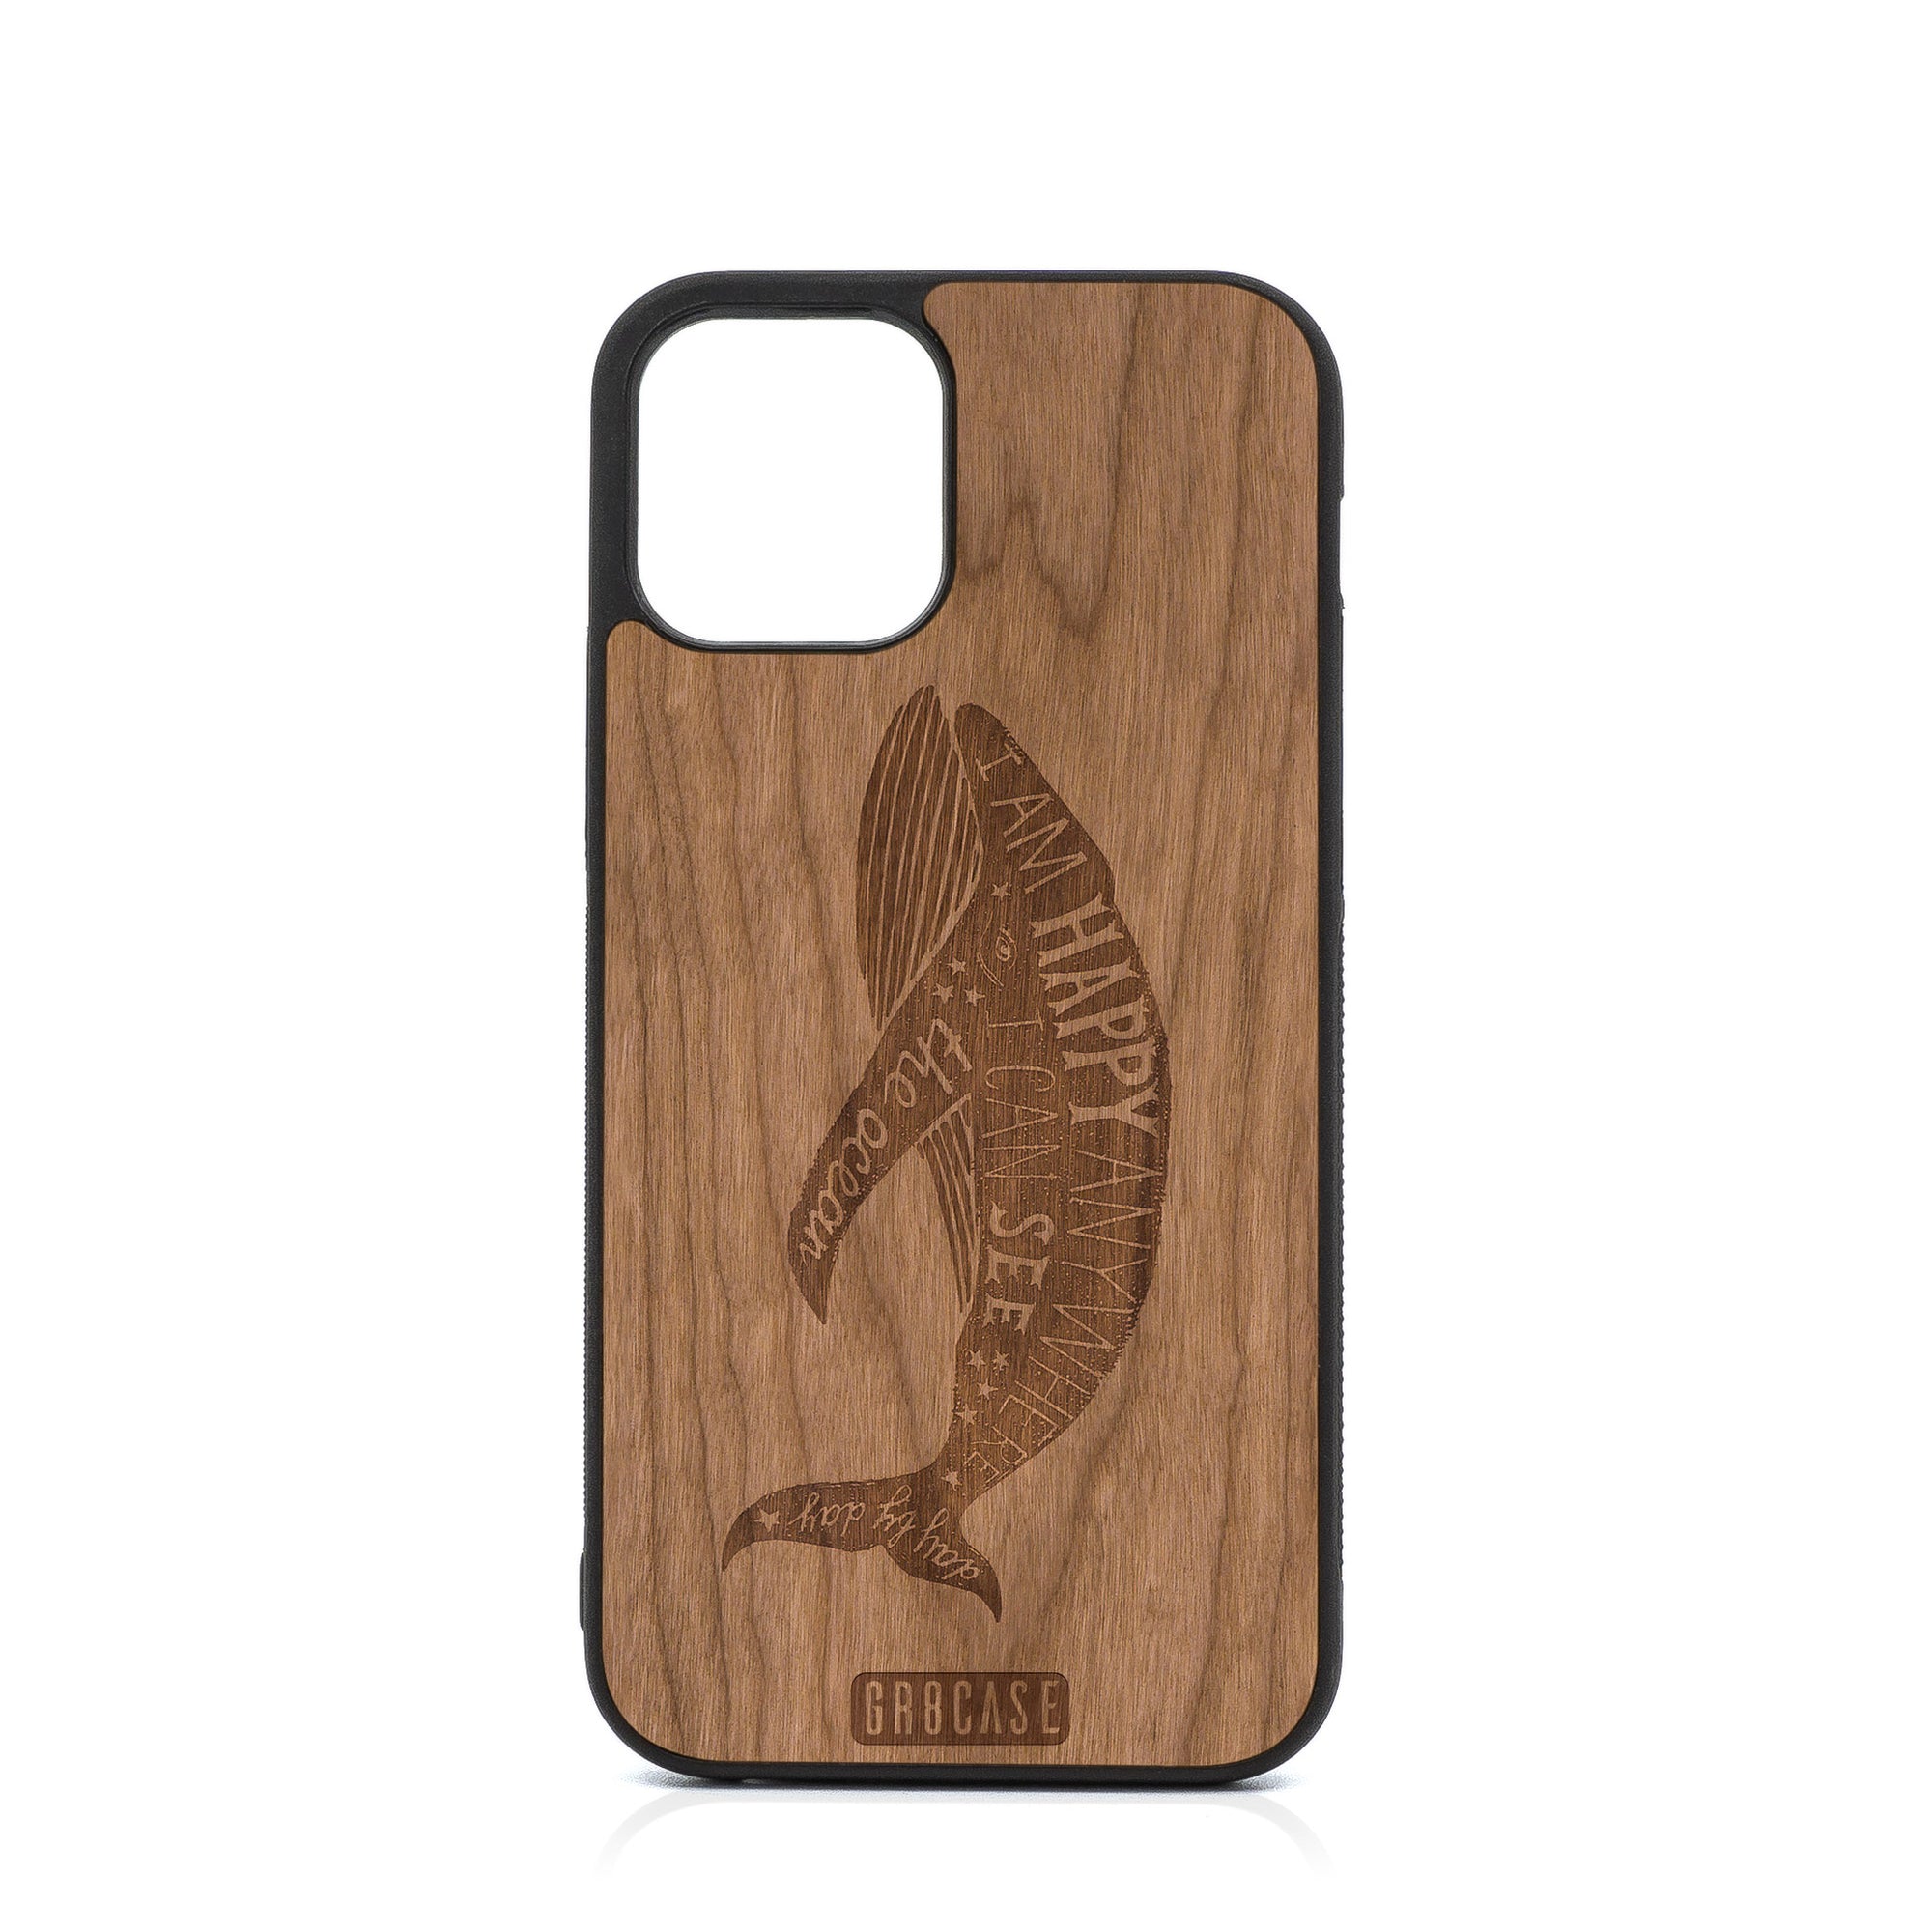 I'm Happy Anywhere I Can See The Ocean (Whale) Design Wood Case For iPhone 12